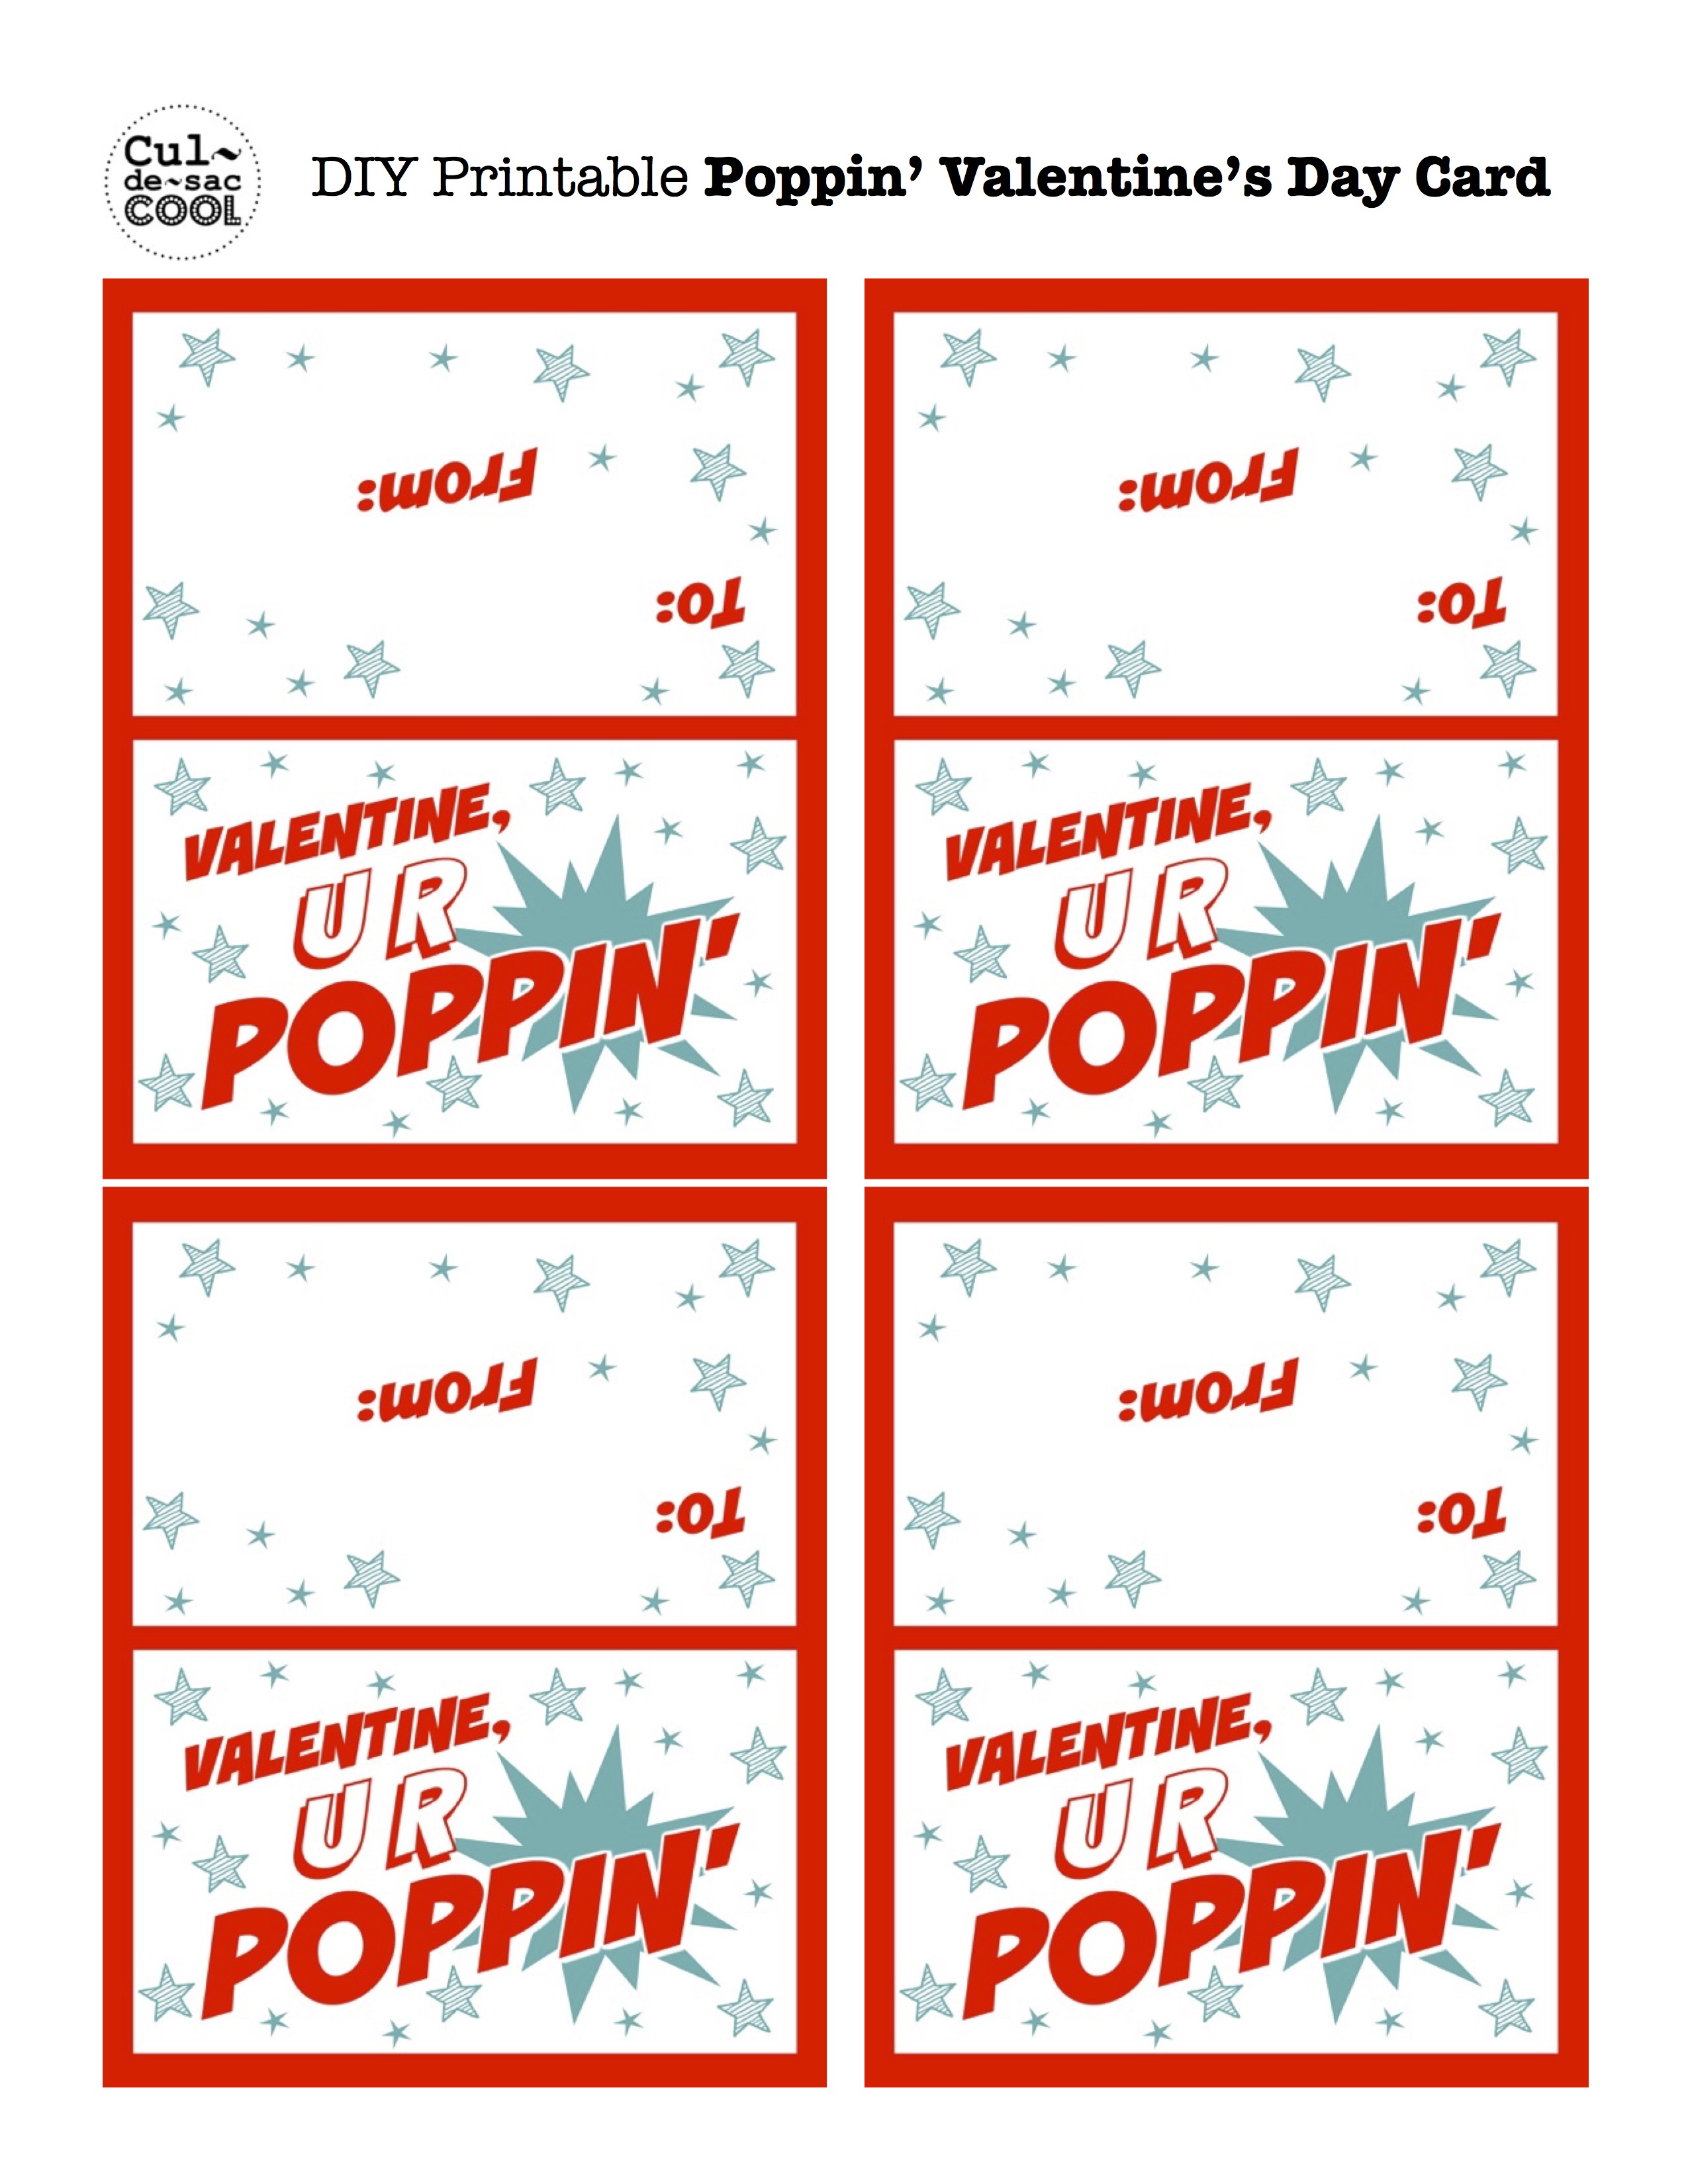 DIY Poppin’ Valentine’s Day Cards for School